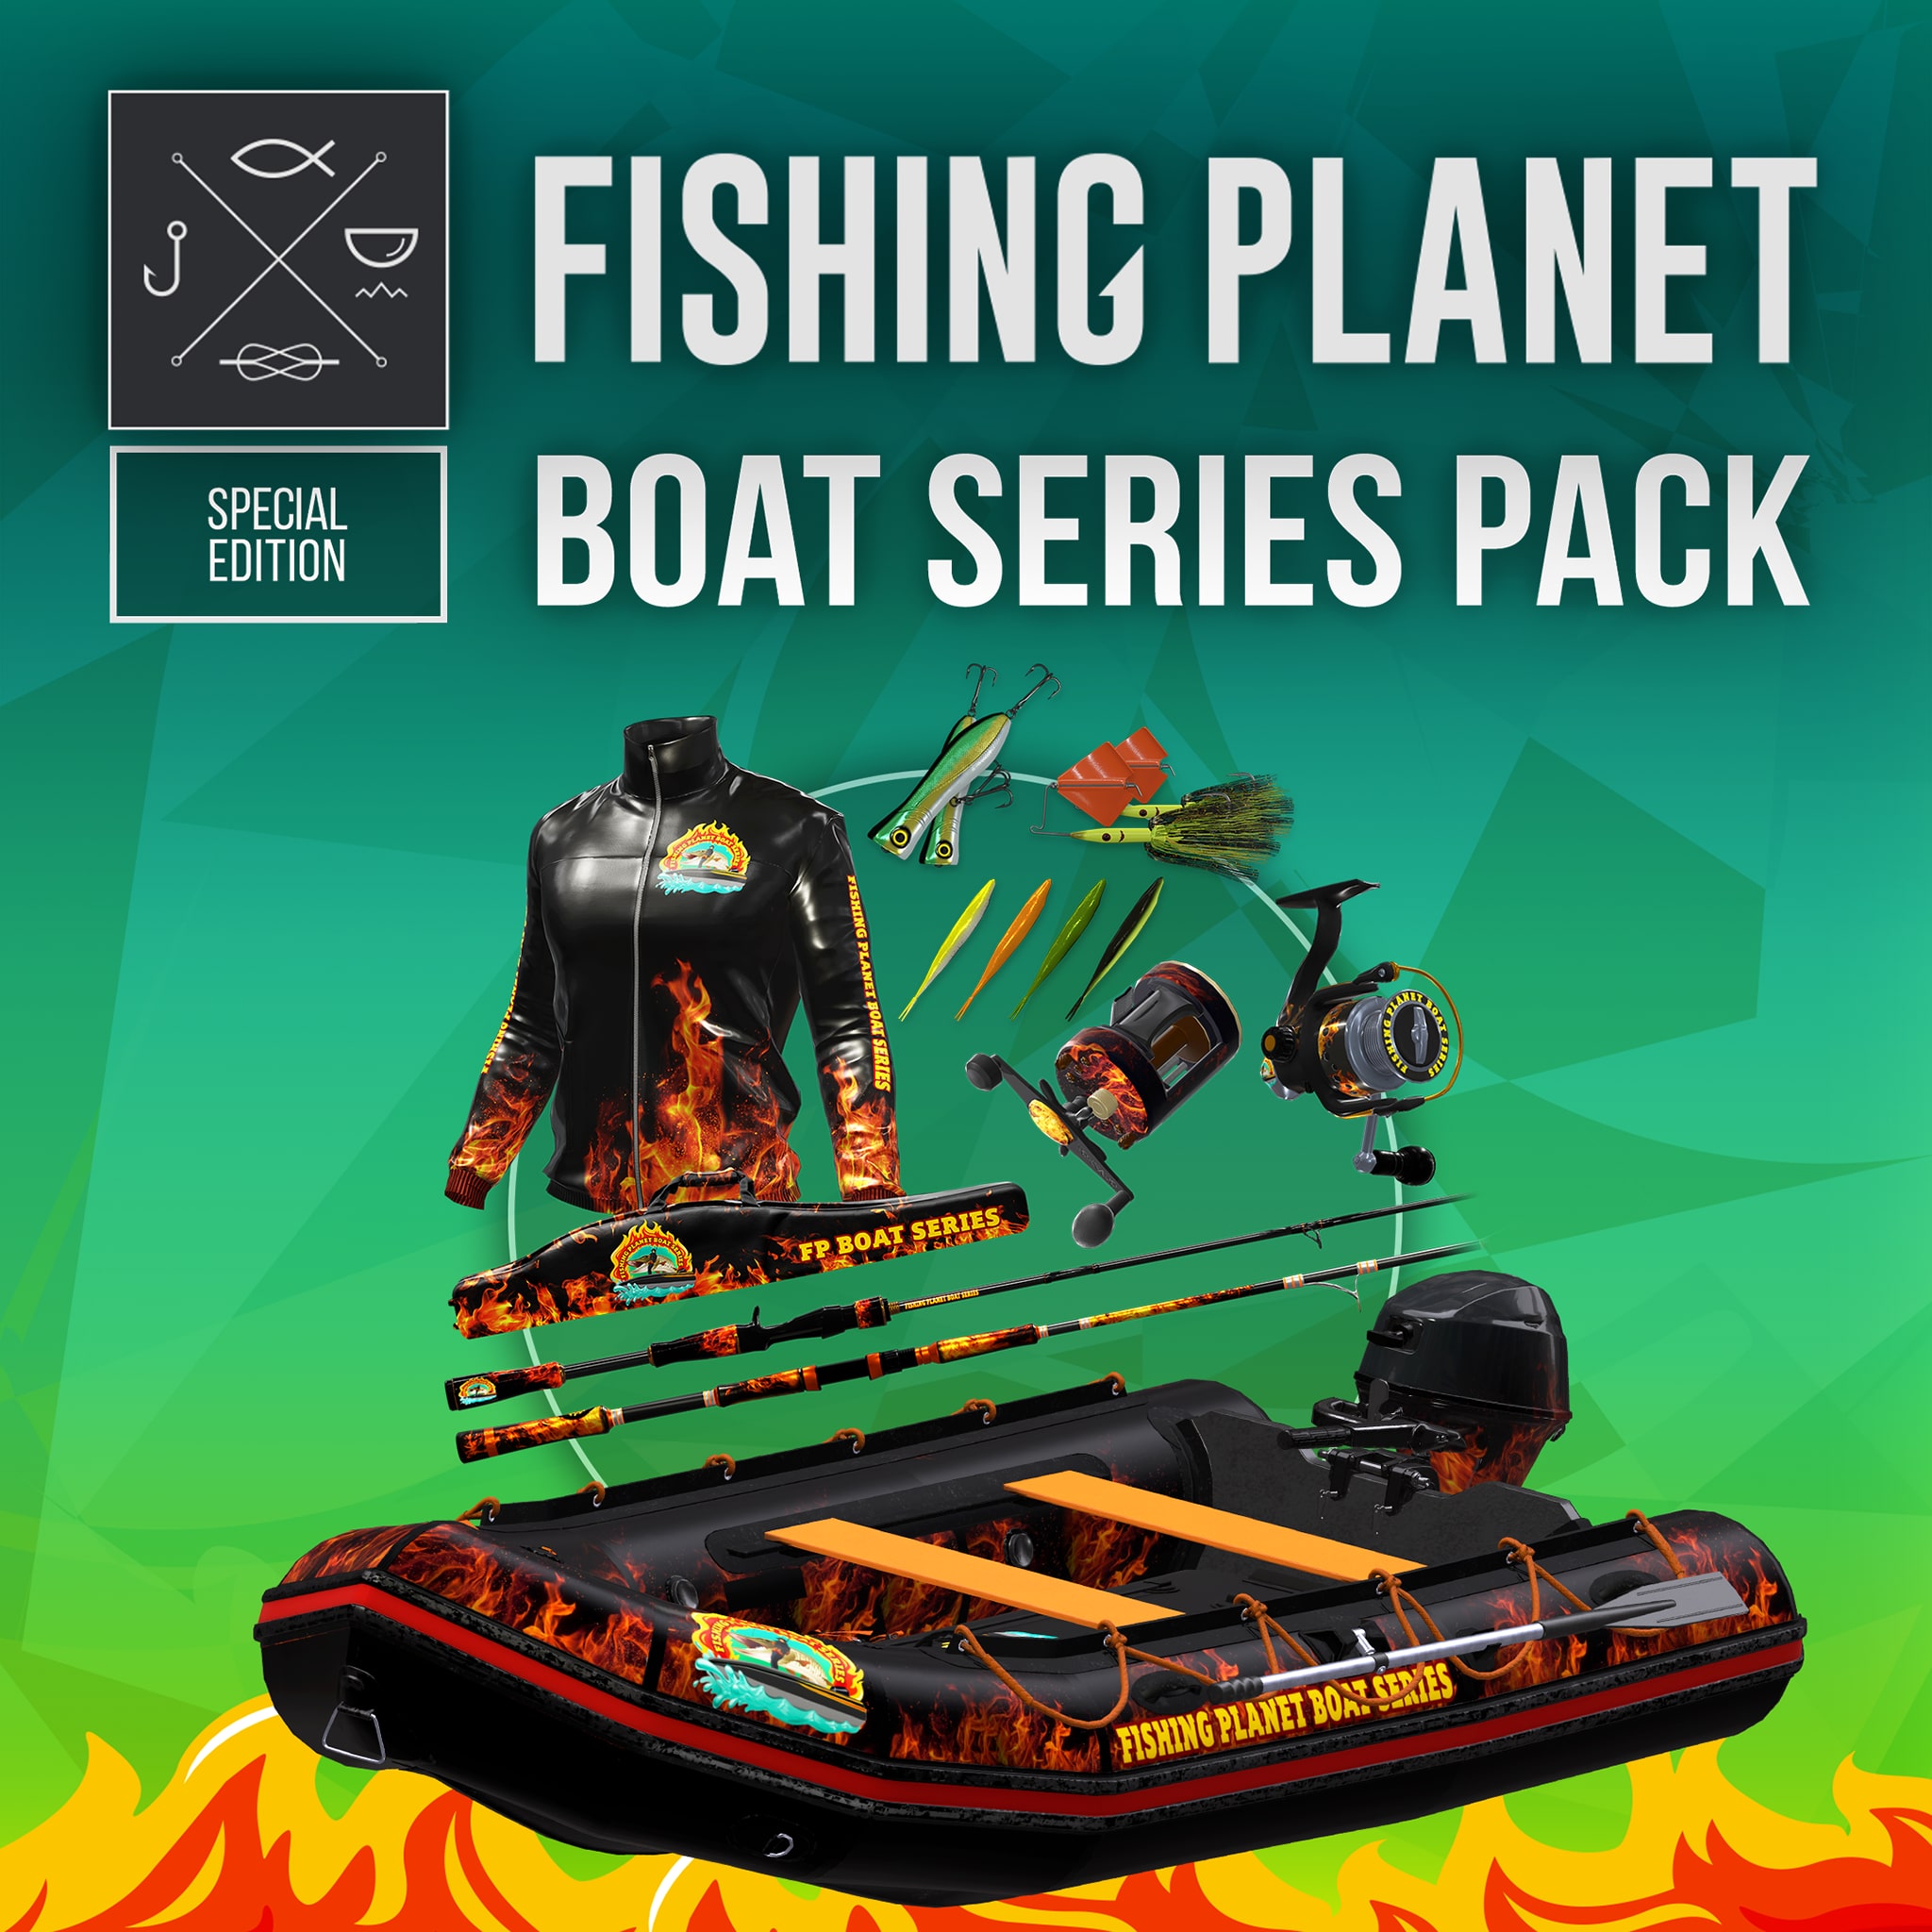 can you get a boat or kayak in fishing planet